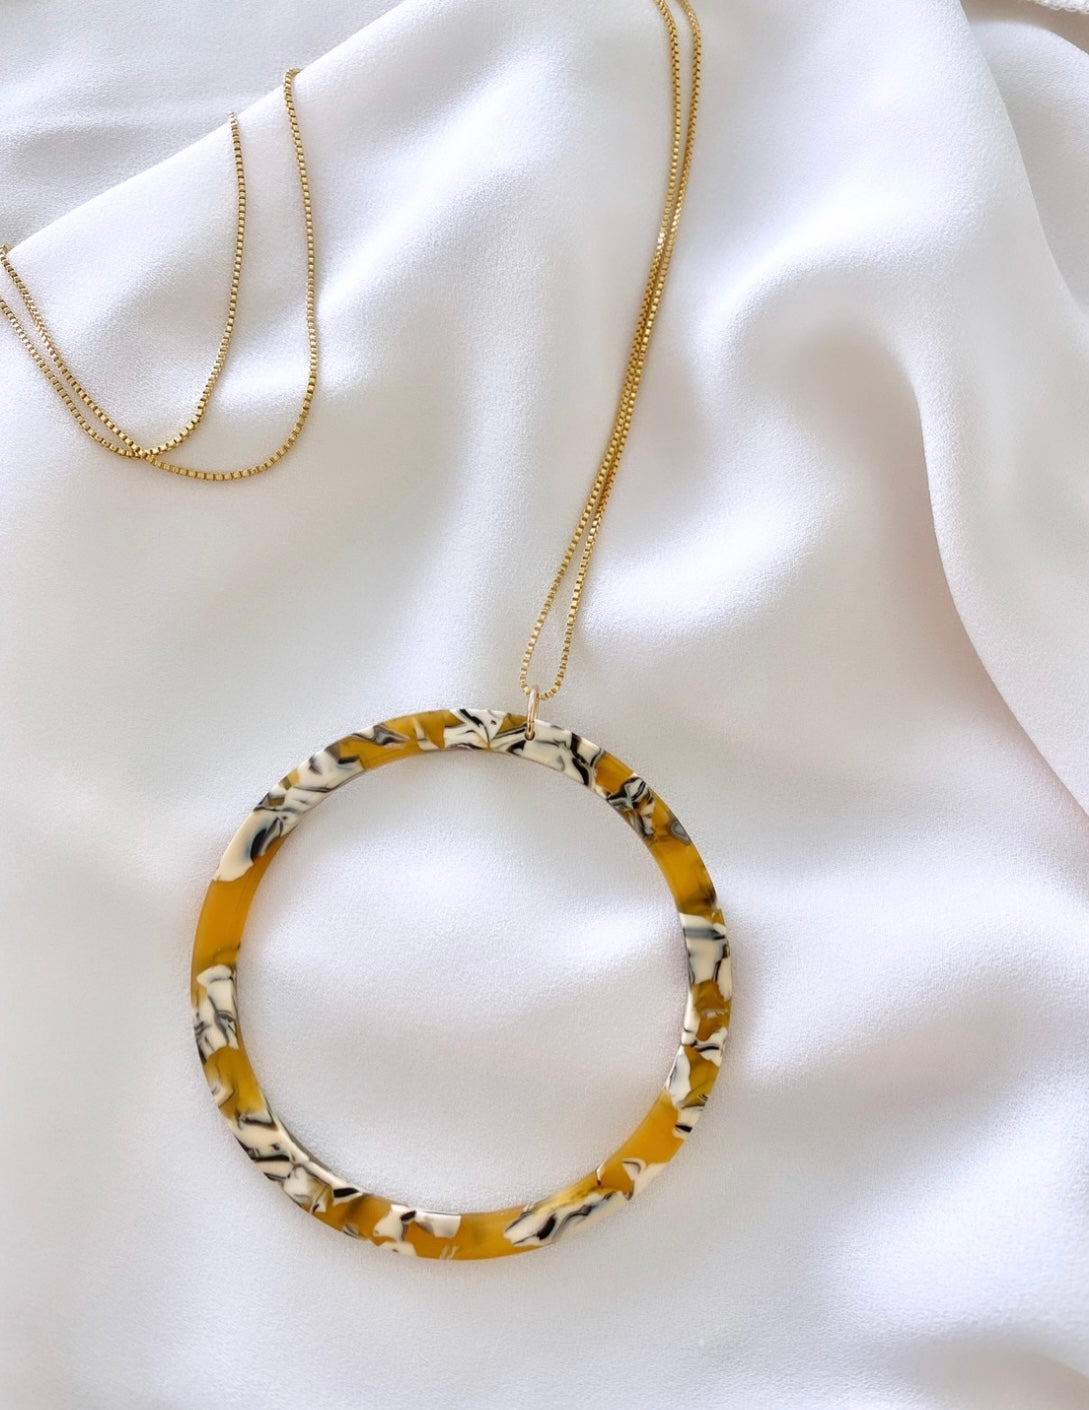 Tortoise Shell Circle Pendant Necklace - Sterling Silver